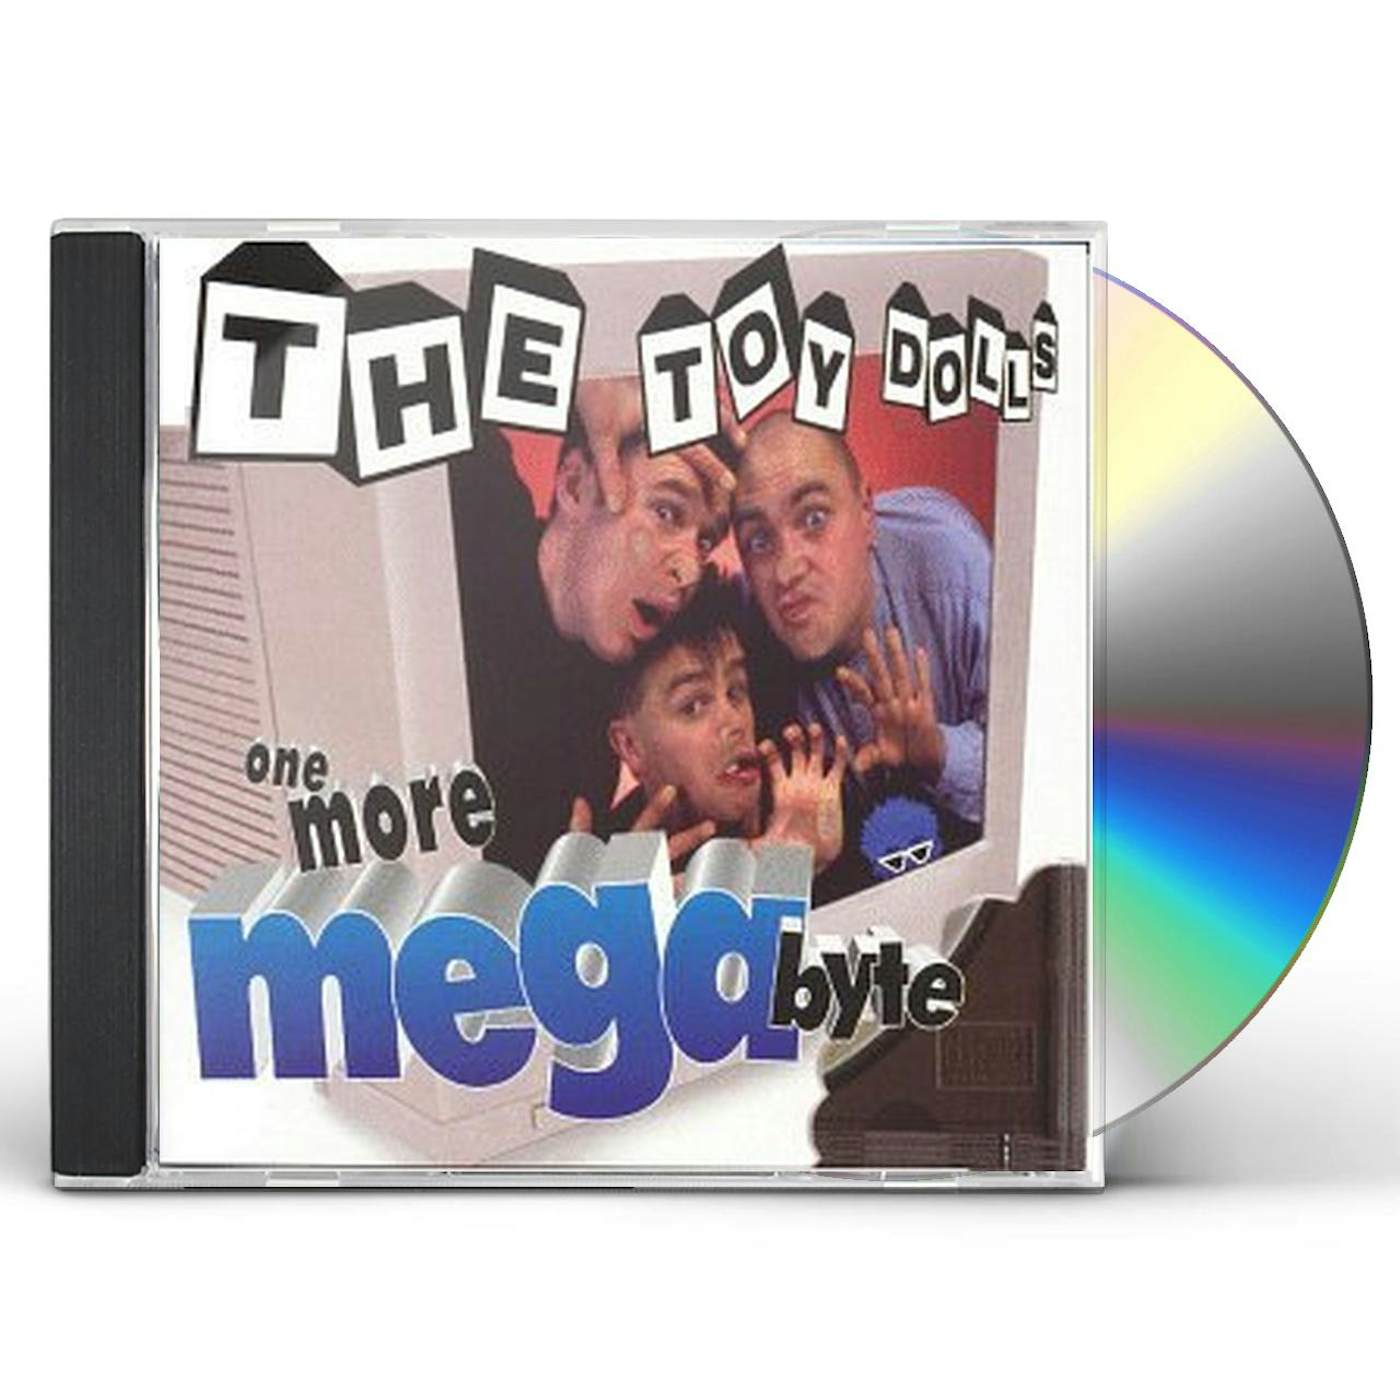 The Toy Dolls ONE MORE MEGABYTE CD